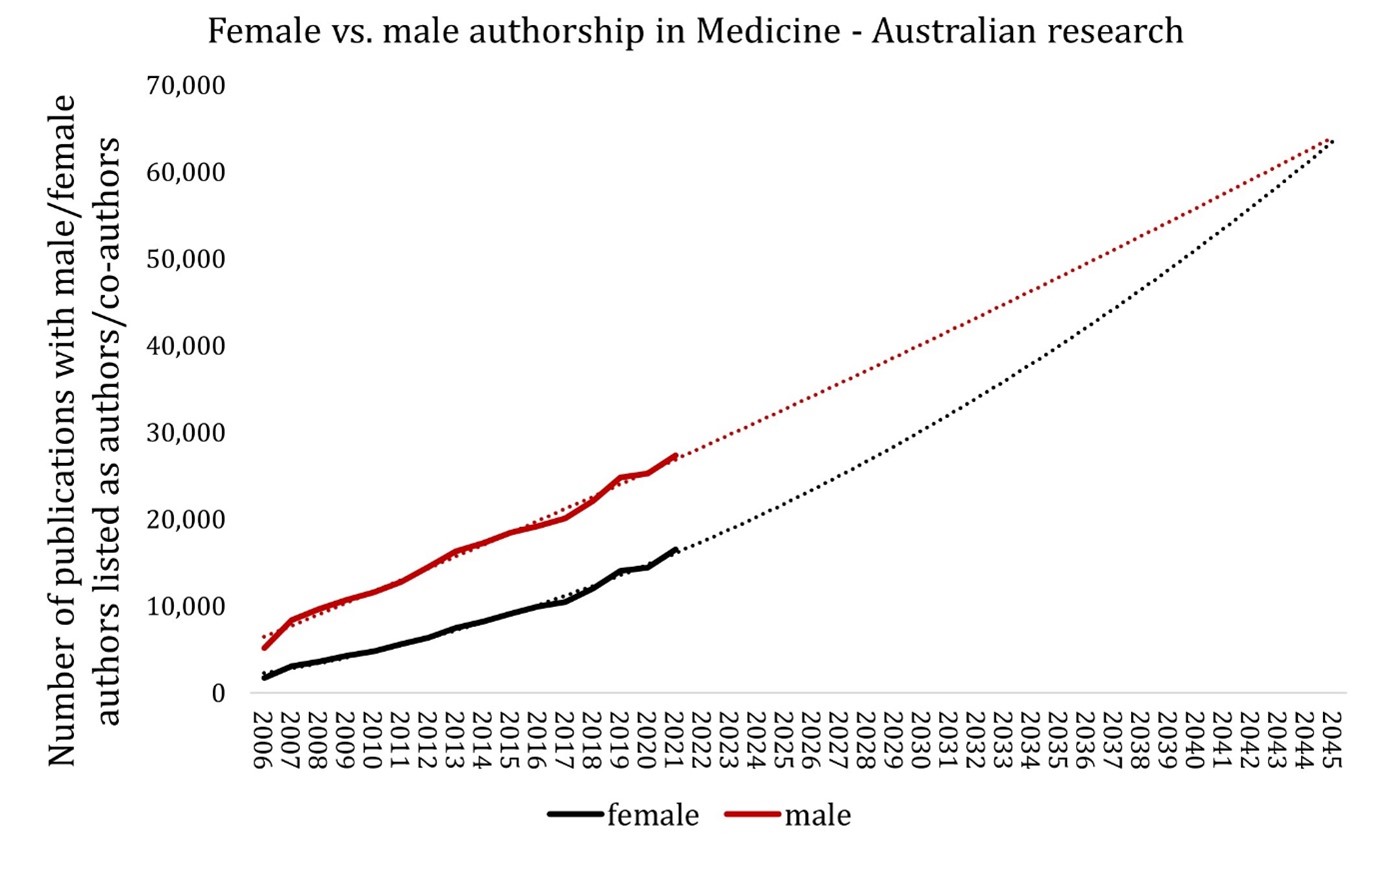 The gender gap in Australian medical publishing - Featured Image